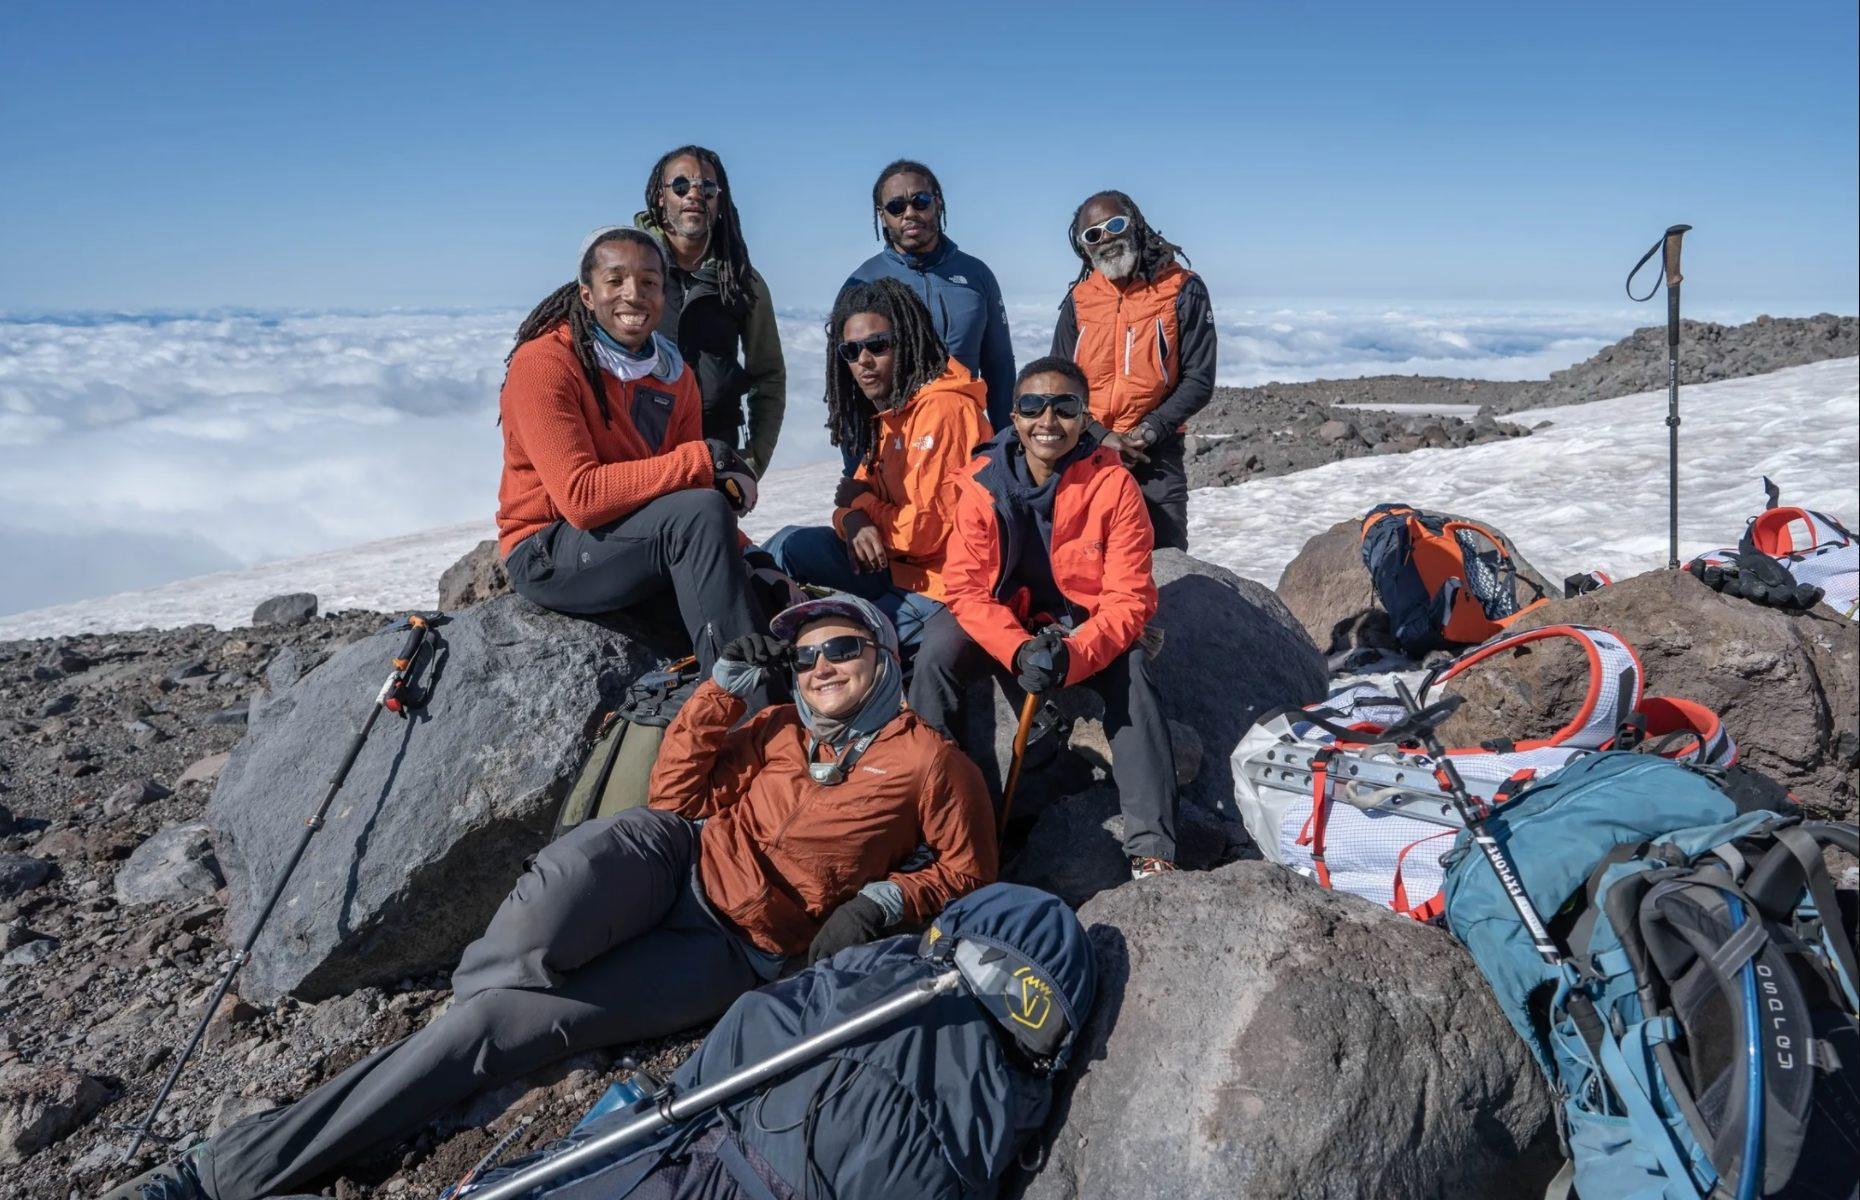 <p>Despite the fact the first American team reached the summit of Everest in 1963, it was more than 40 years before the first Black climber achieved the accolade. This reflects a broader trend of a <a href="https://www.nbcnews.com/news/nbcblk/-black-team-will-climb-mount-everest-first-time-rcna2315">lack of diversity in mountaineering</a> – although an all-Black team is hoping to change that. In 2022, the <a href="https://fullcircleeverest.com/">Full Circle</a> expedition will see a team of nine climbers, led by mountaineer Phil Henderson, summit the legendary peak. It’s hoped that the expedition will encourage more Black Americans to join the outdoor movement.</p>